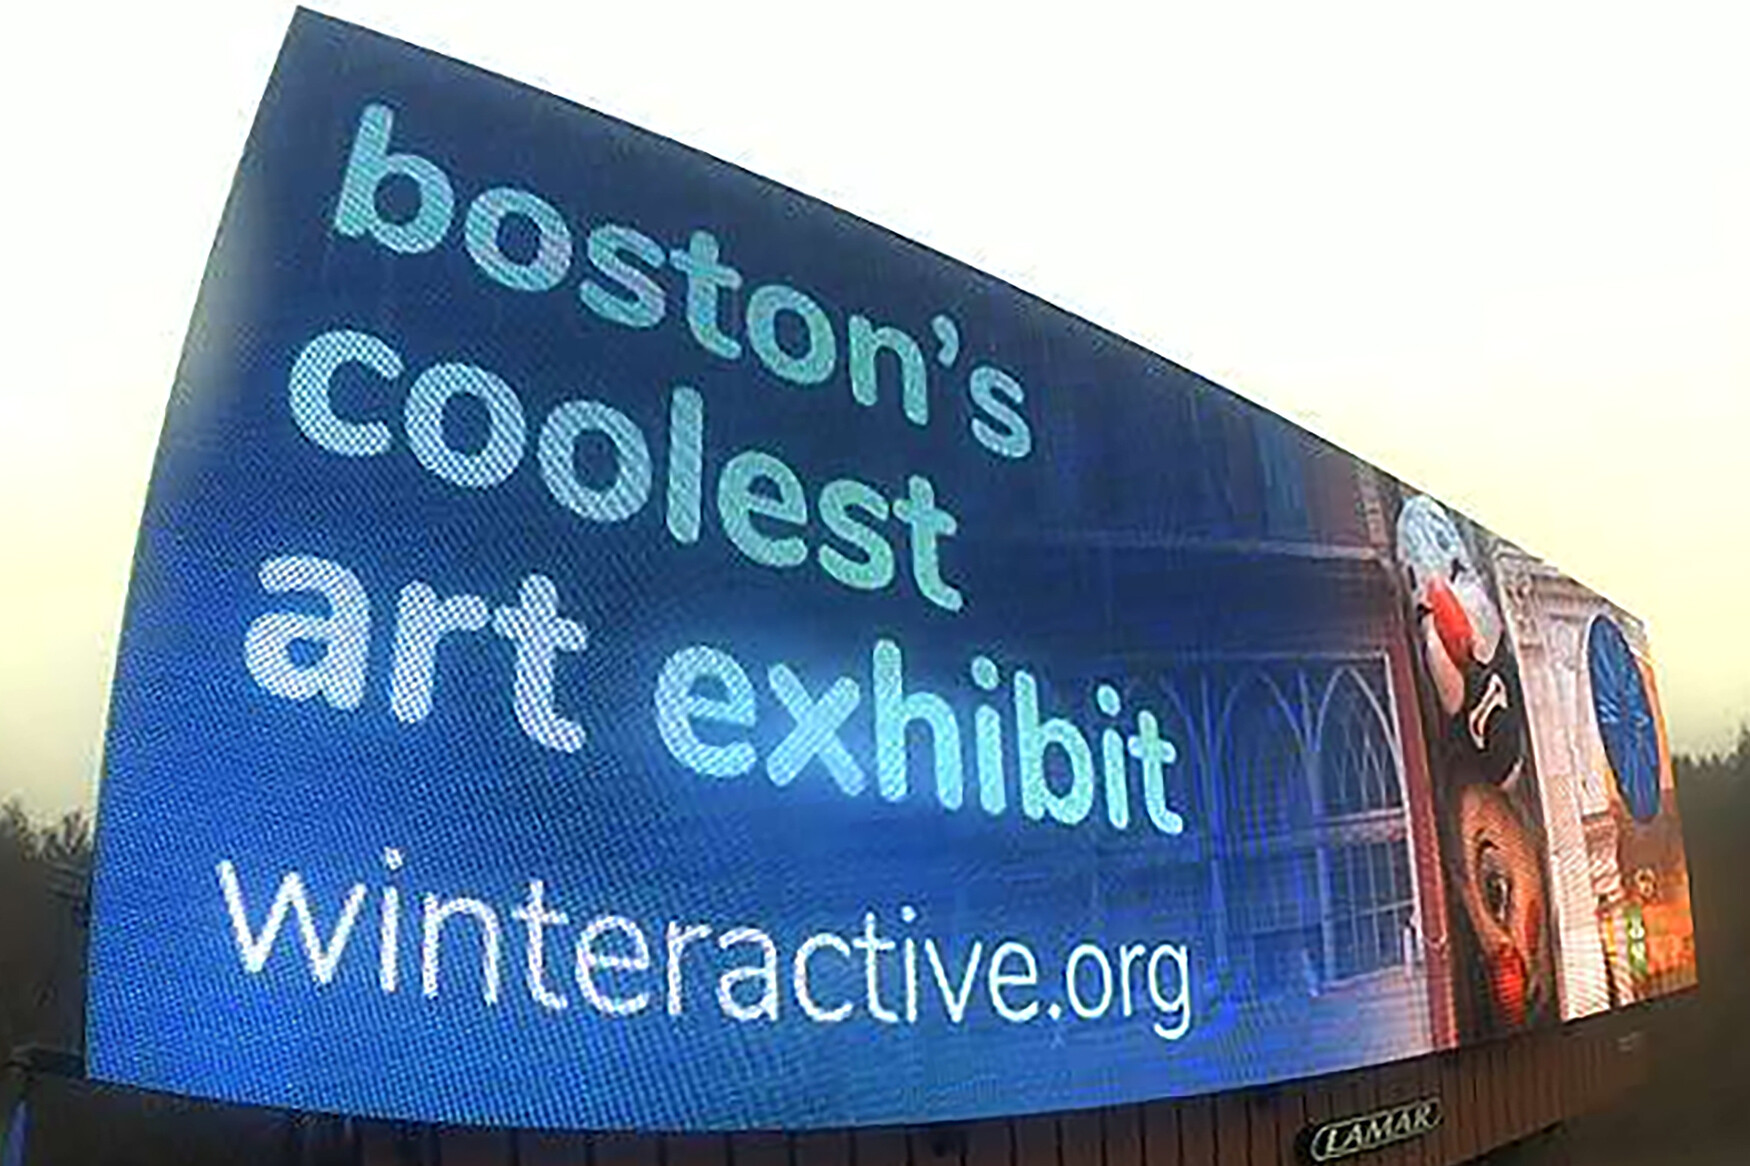 Digital billboard showing “boston’s coolest art exhibit - winteractive.org” with image of Nag & Nell